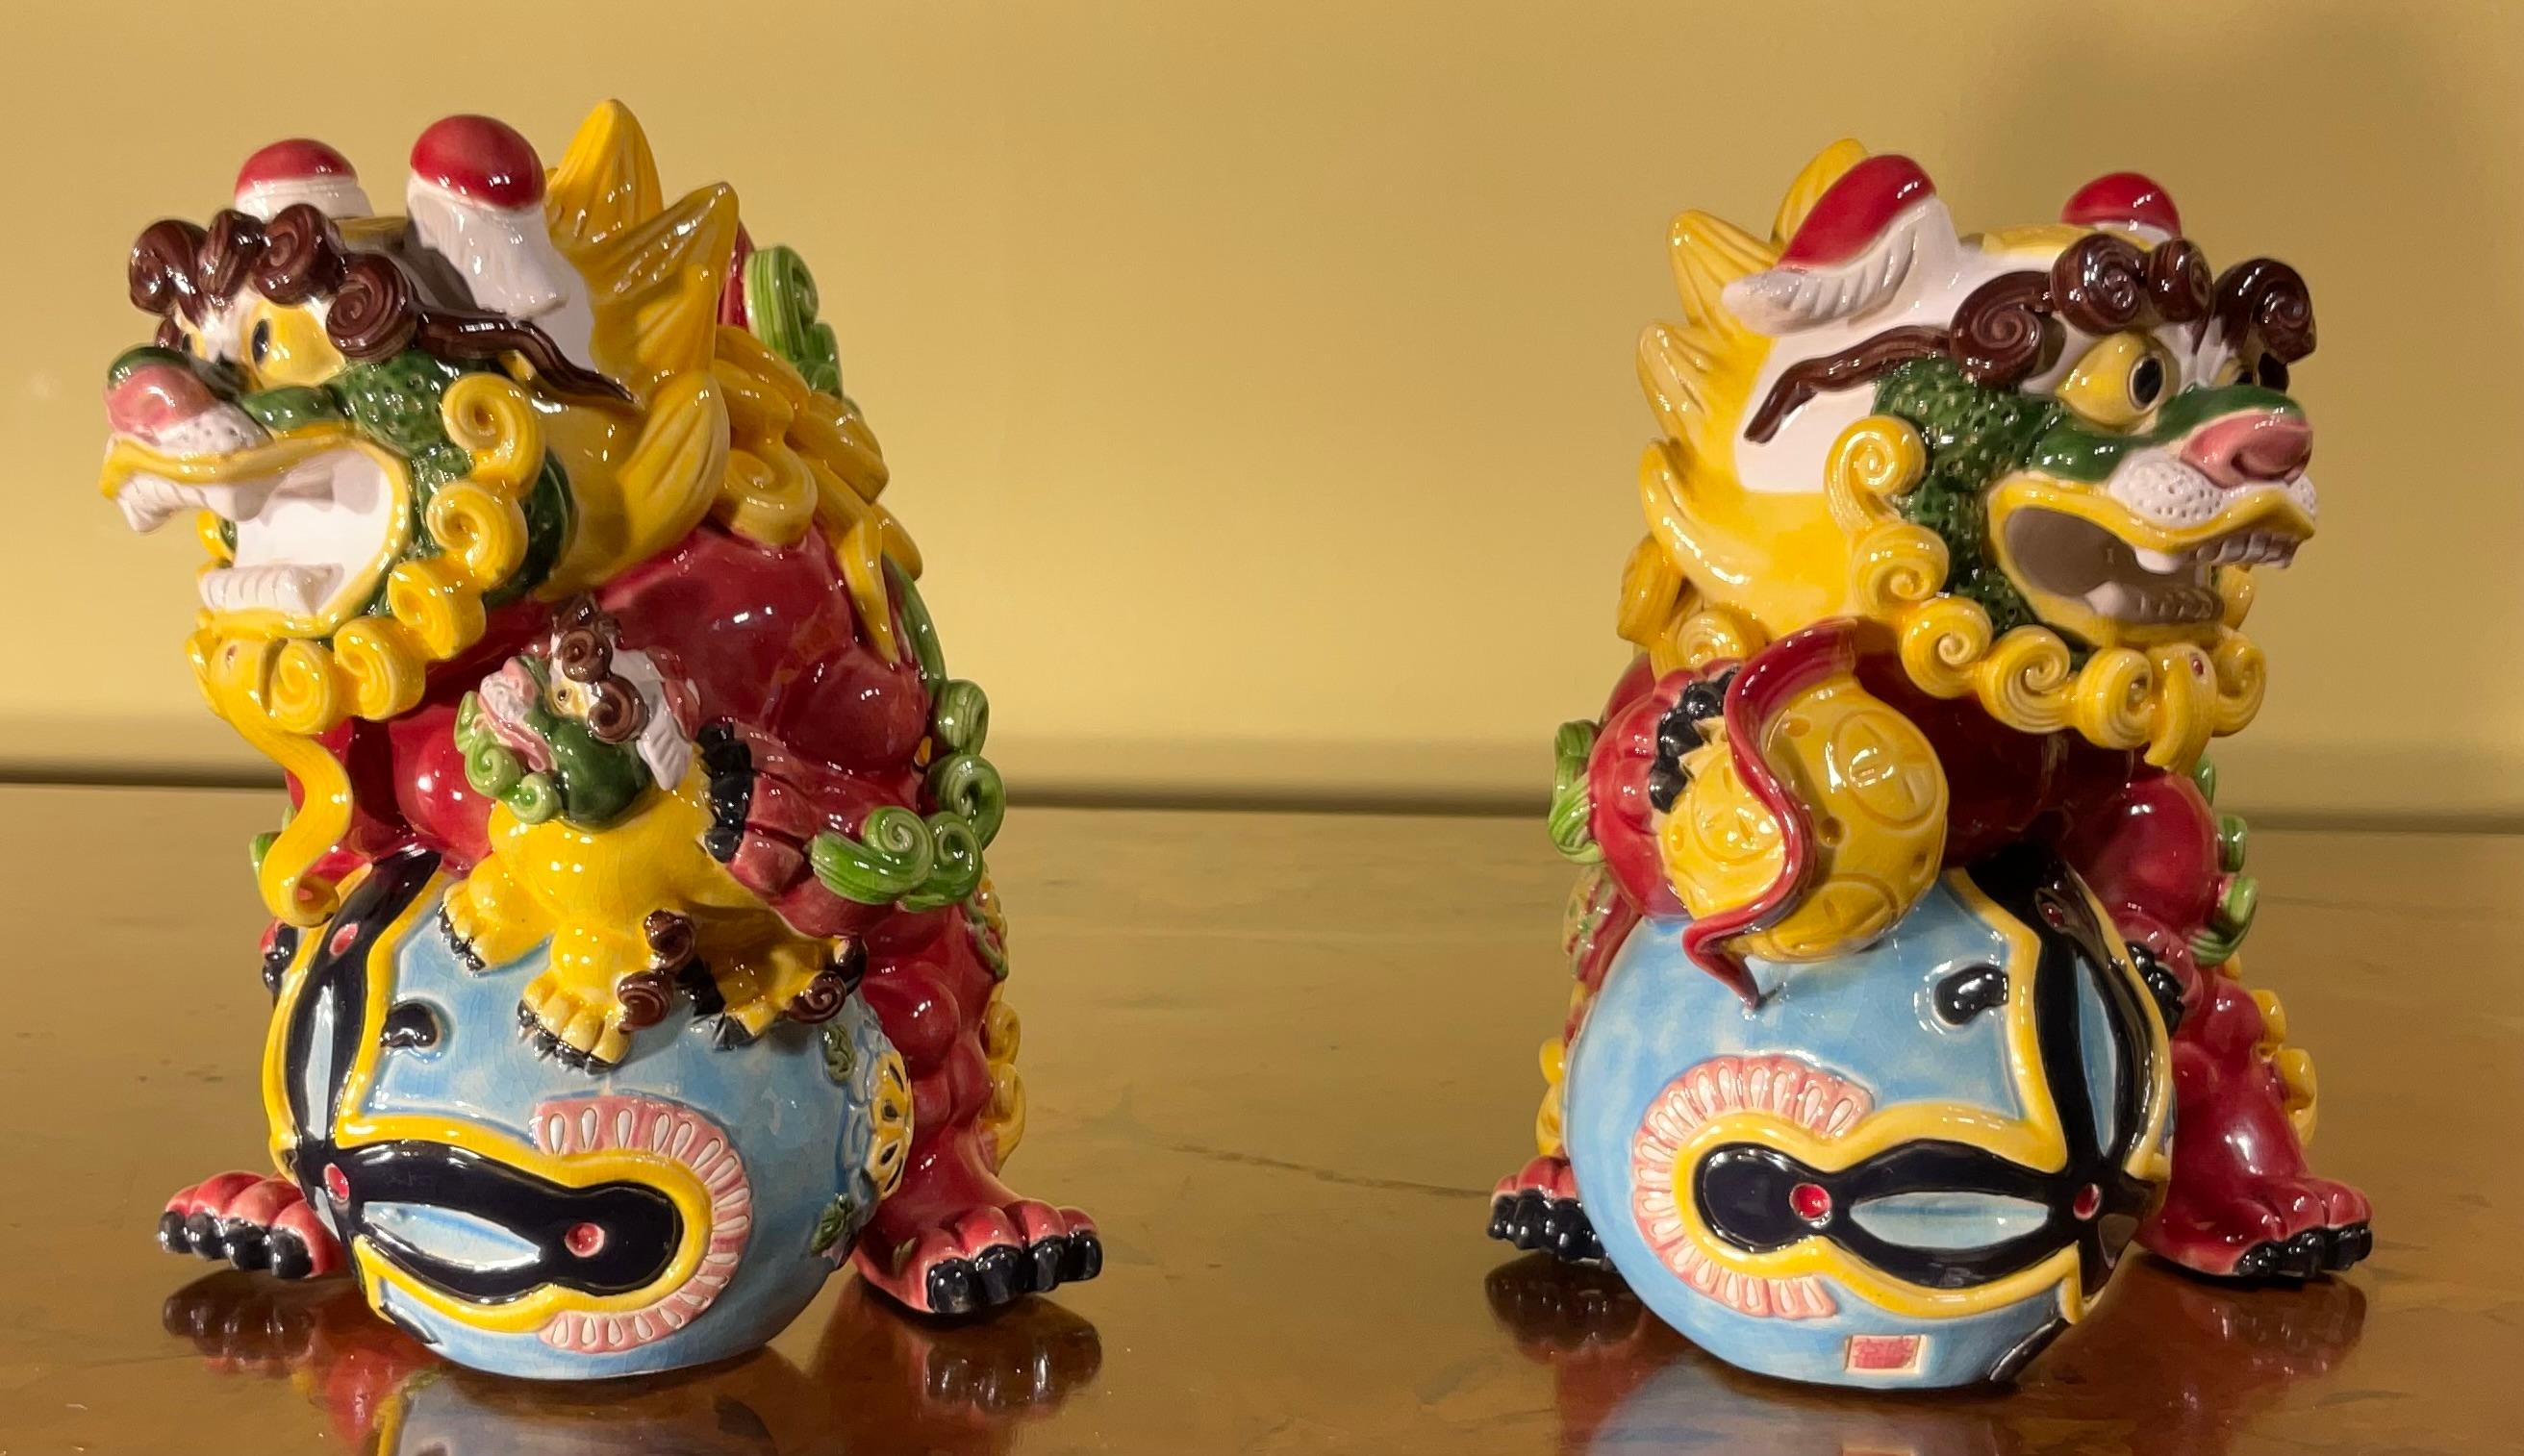 Pair of Chinese porcelain male and female foo dogs. The male foo dog seems to have a ball on his foot while the female has a baby foo dog on hers. Made in China, great vivid details with beautiful vibrant colours.
Exceptional object of art for